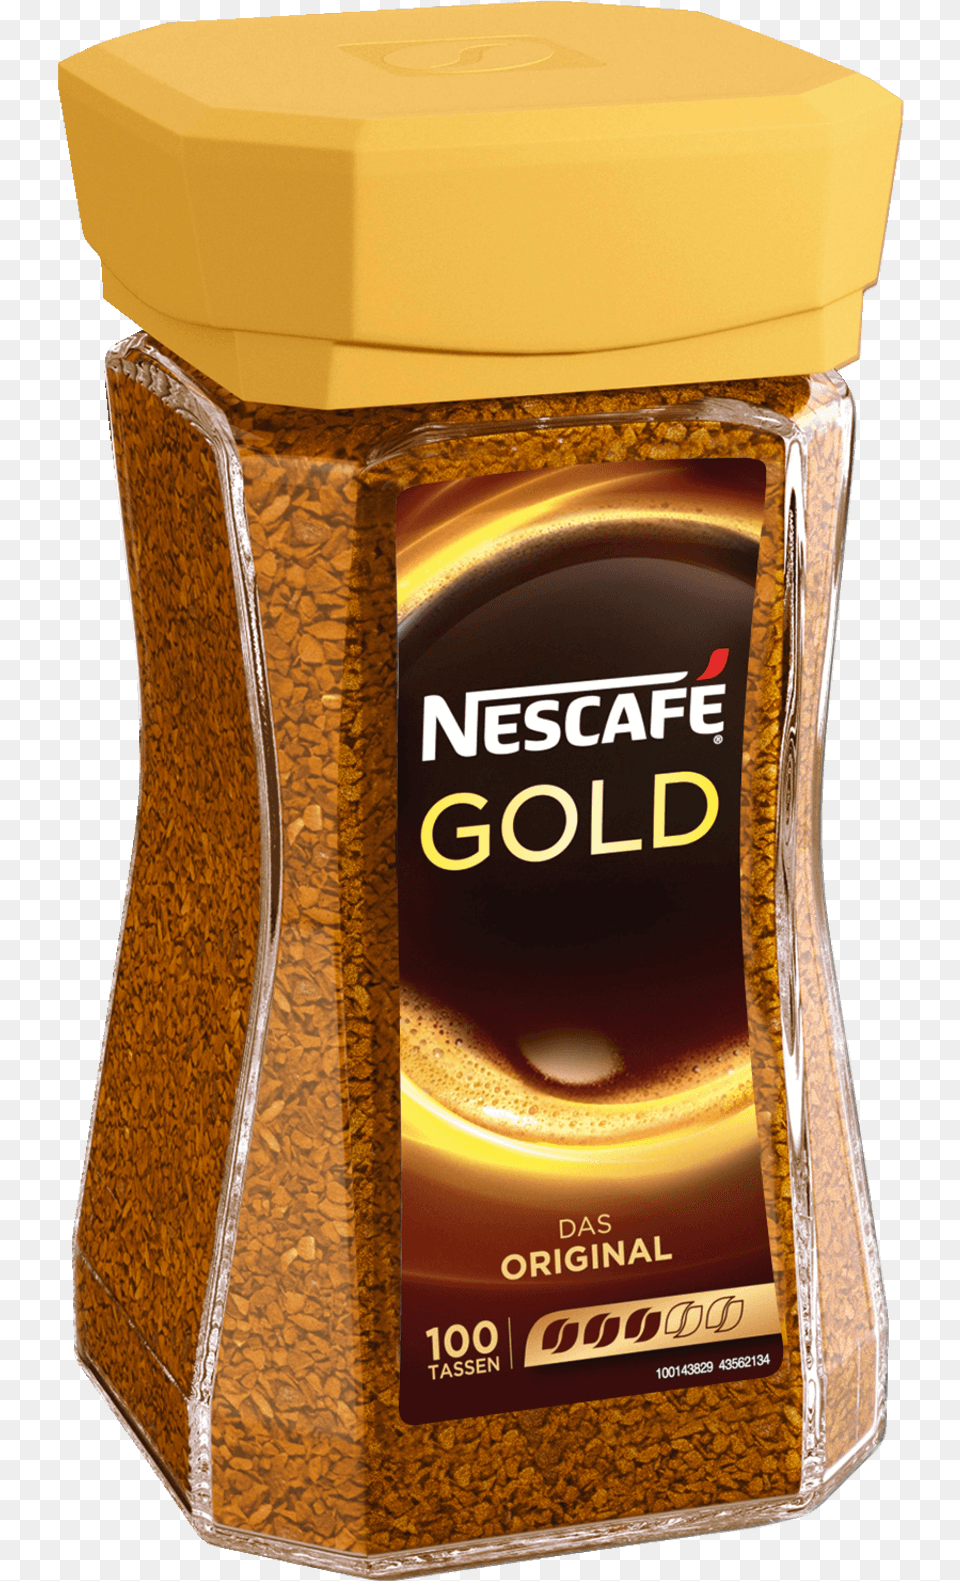 Nescafe Coffee Download Image Nescafe Gold Coffee, Food, Bottle, Cosmetics, Perfume Free Png